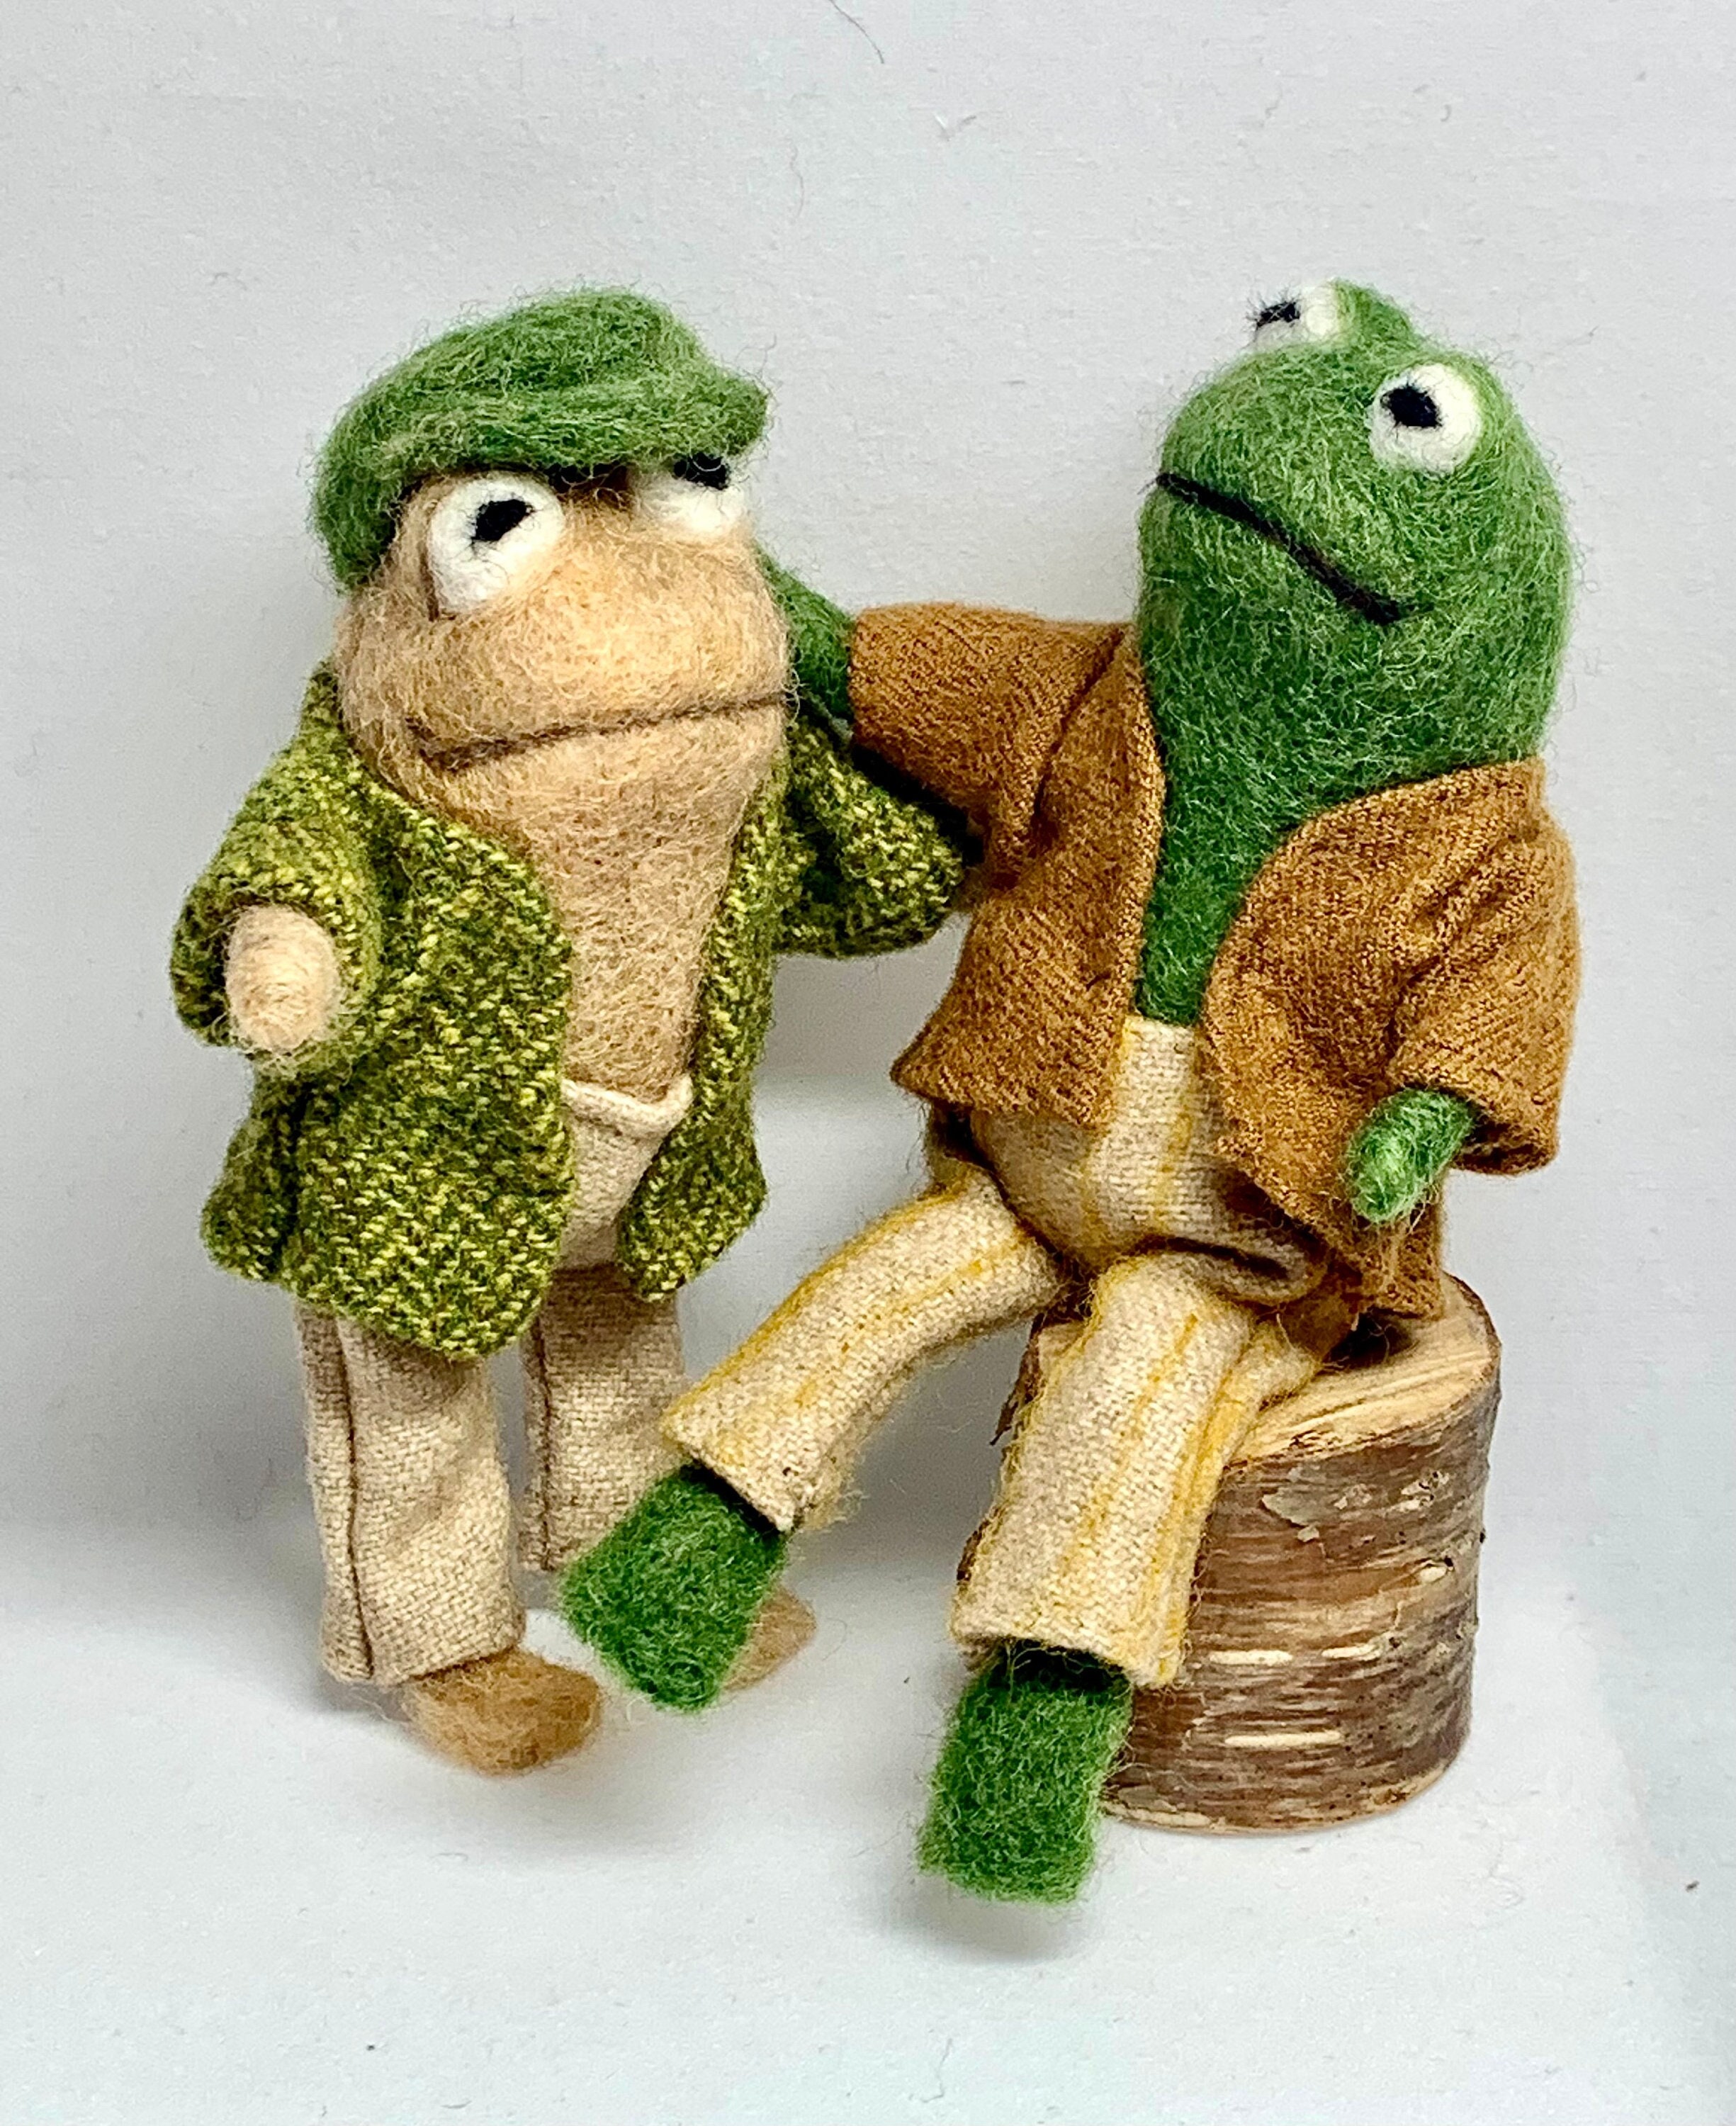 Frog and Toad Sculptures, Frog and Toad Decor, Needle Felted Sculpture 